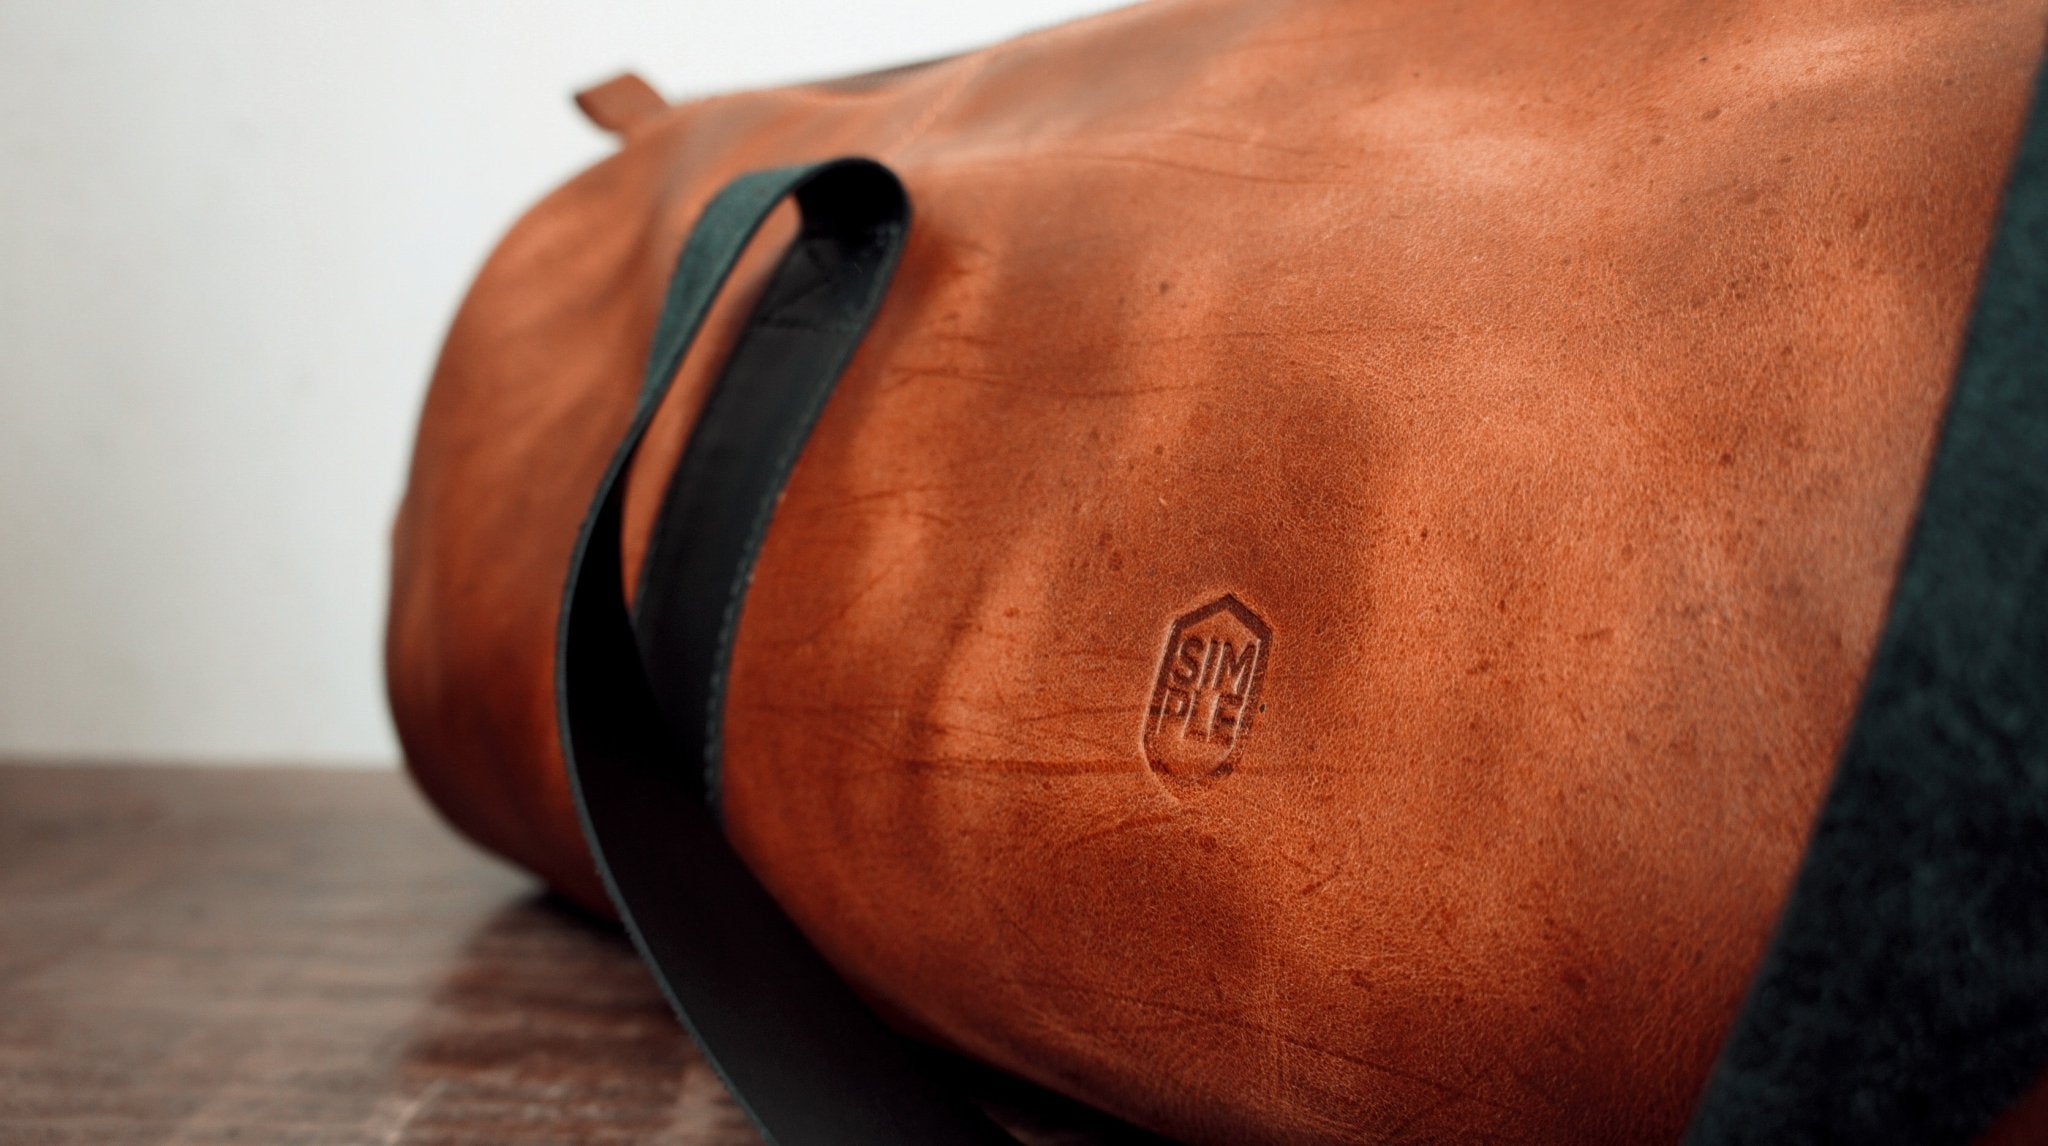 Simple Leather duffle bag, brown with black handles